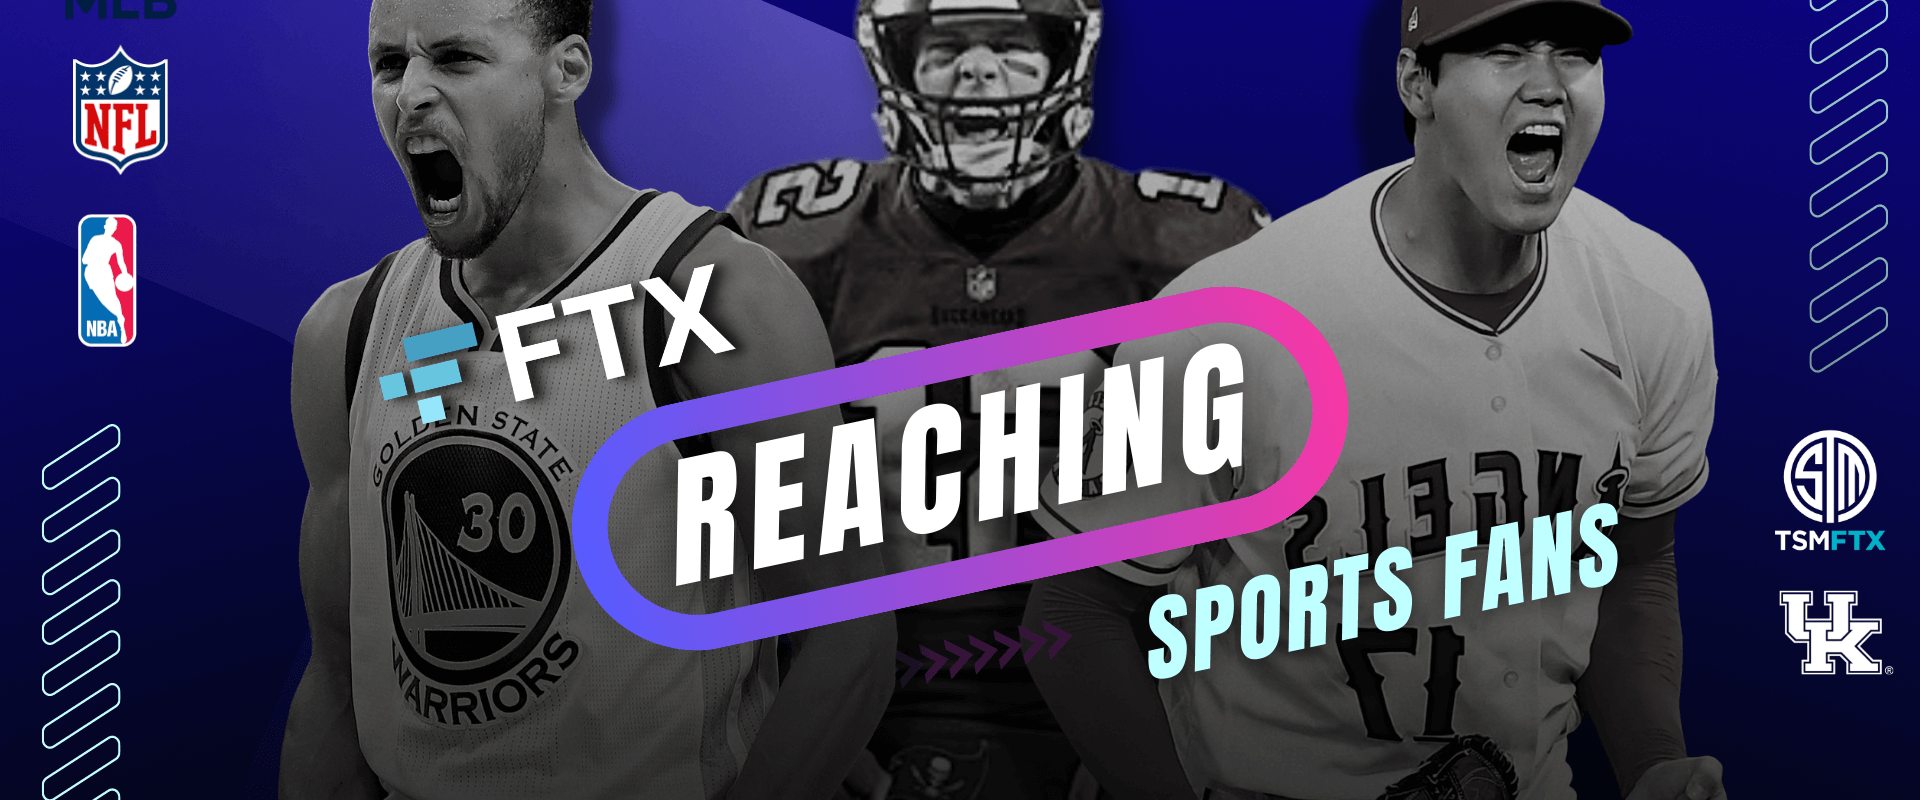 1920x1080_In 2021, FTX Used Sports To Reach Crypto-Curious Sports Fans-Ron2